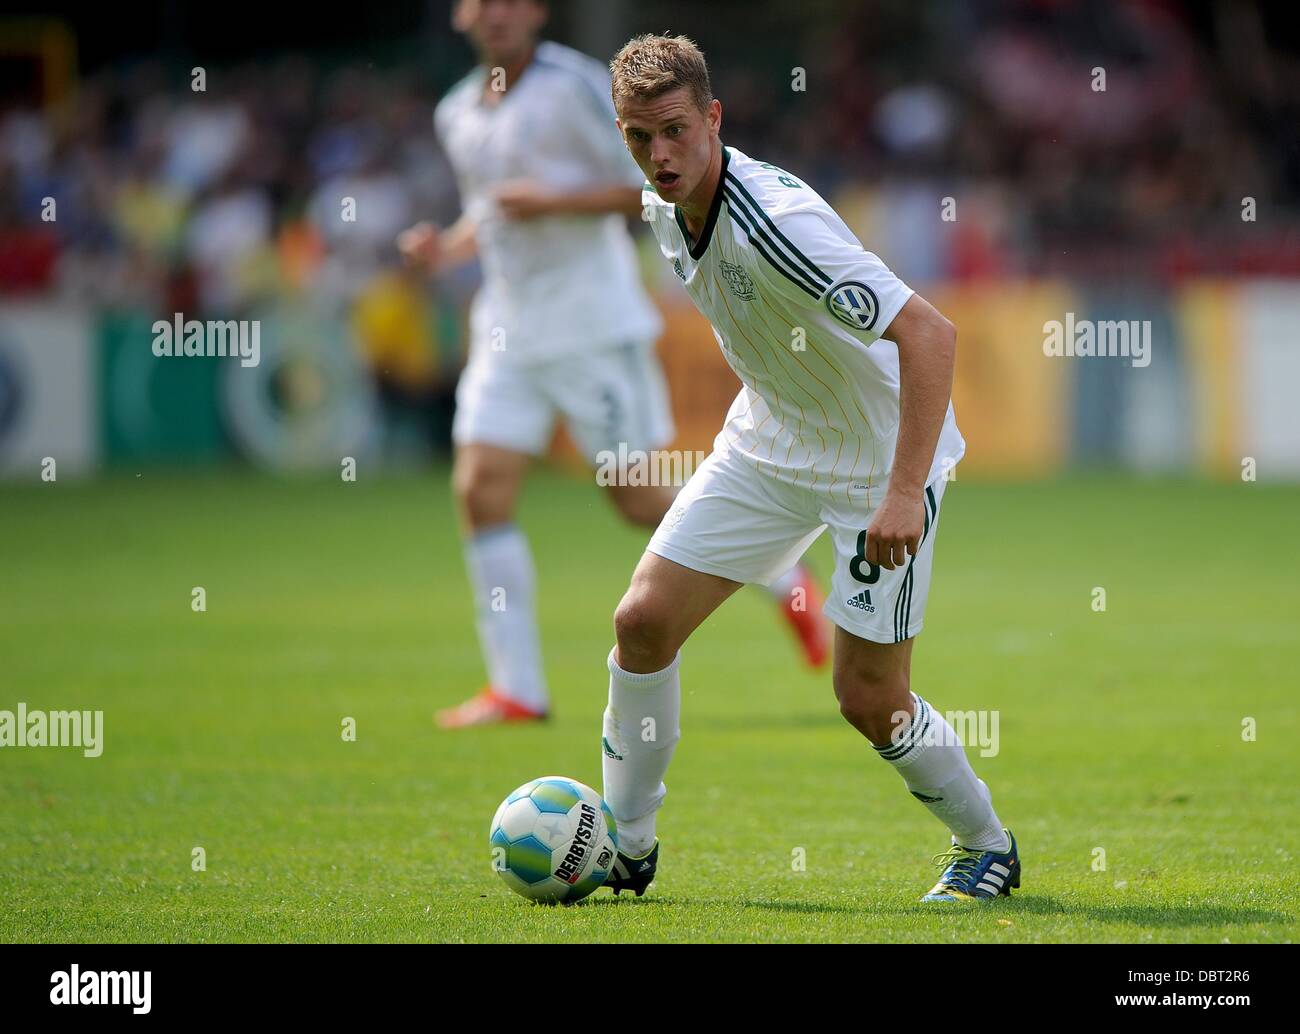 Lippstadt, Germany. 03rd Aug, 2013. Leverkusen's Lars Bender plays the ball during the first round DFB Cup match between SV Lippstadt 08 and Bayer Leverkusen at the Am Waldschloesschen stadium in Lippstadt, Germany, 03 August 2013. Photo: Jonas Guettler/dpa/Alamy Live News Stock Photo